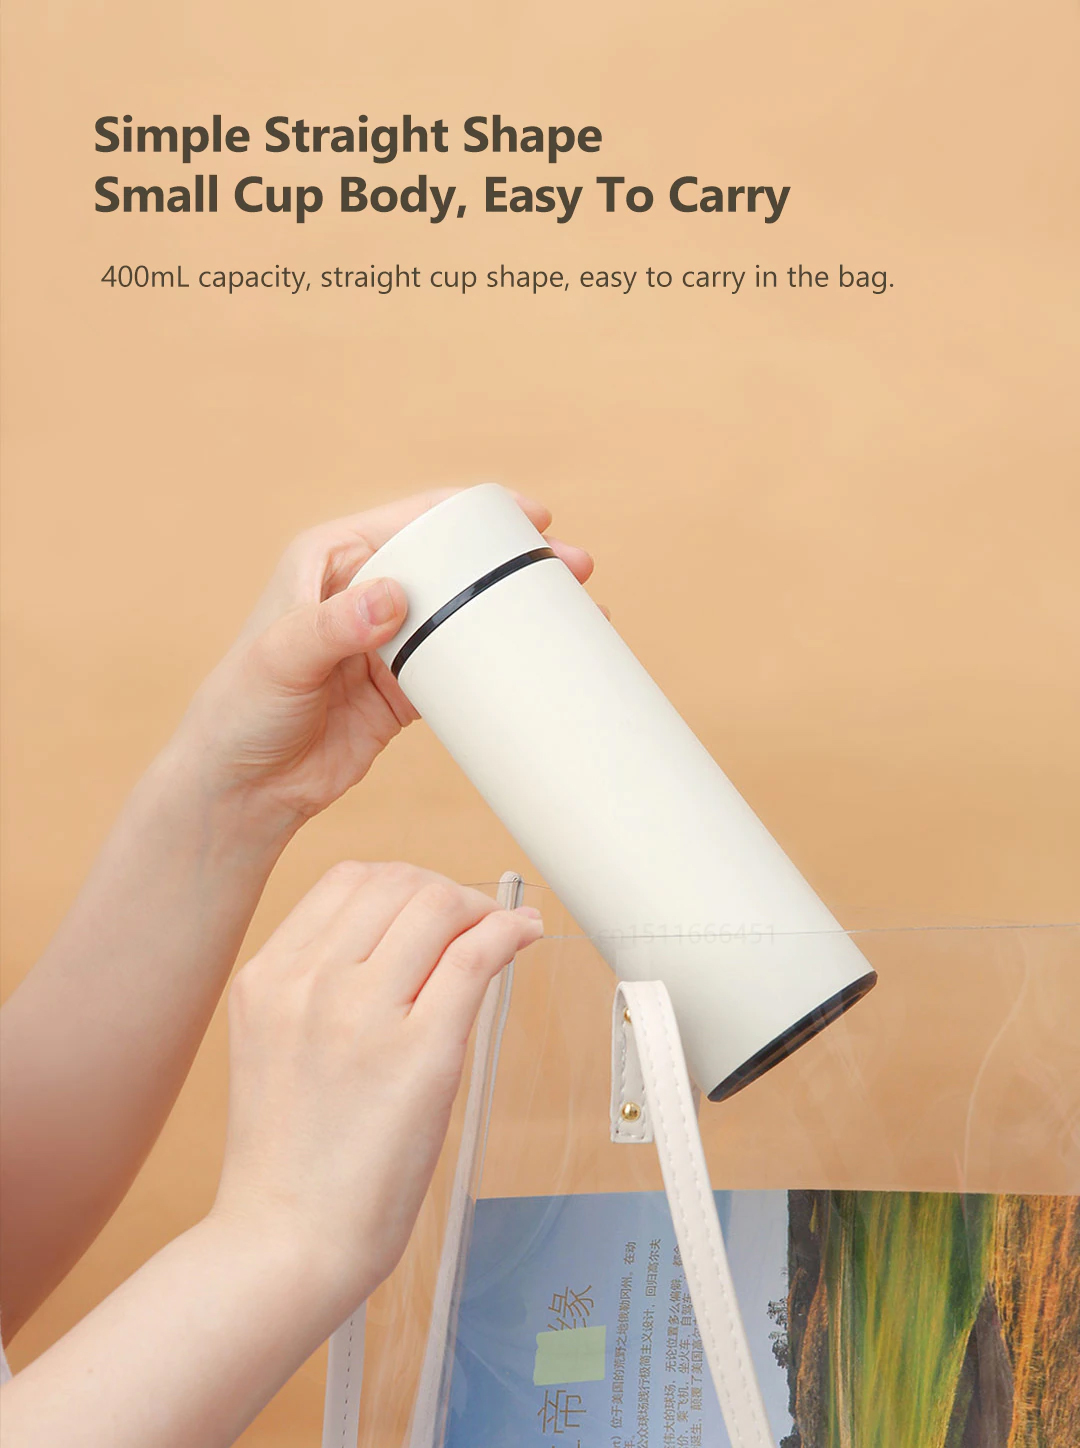 400mL capacity, straight cup shape, easy to carry in the bag.